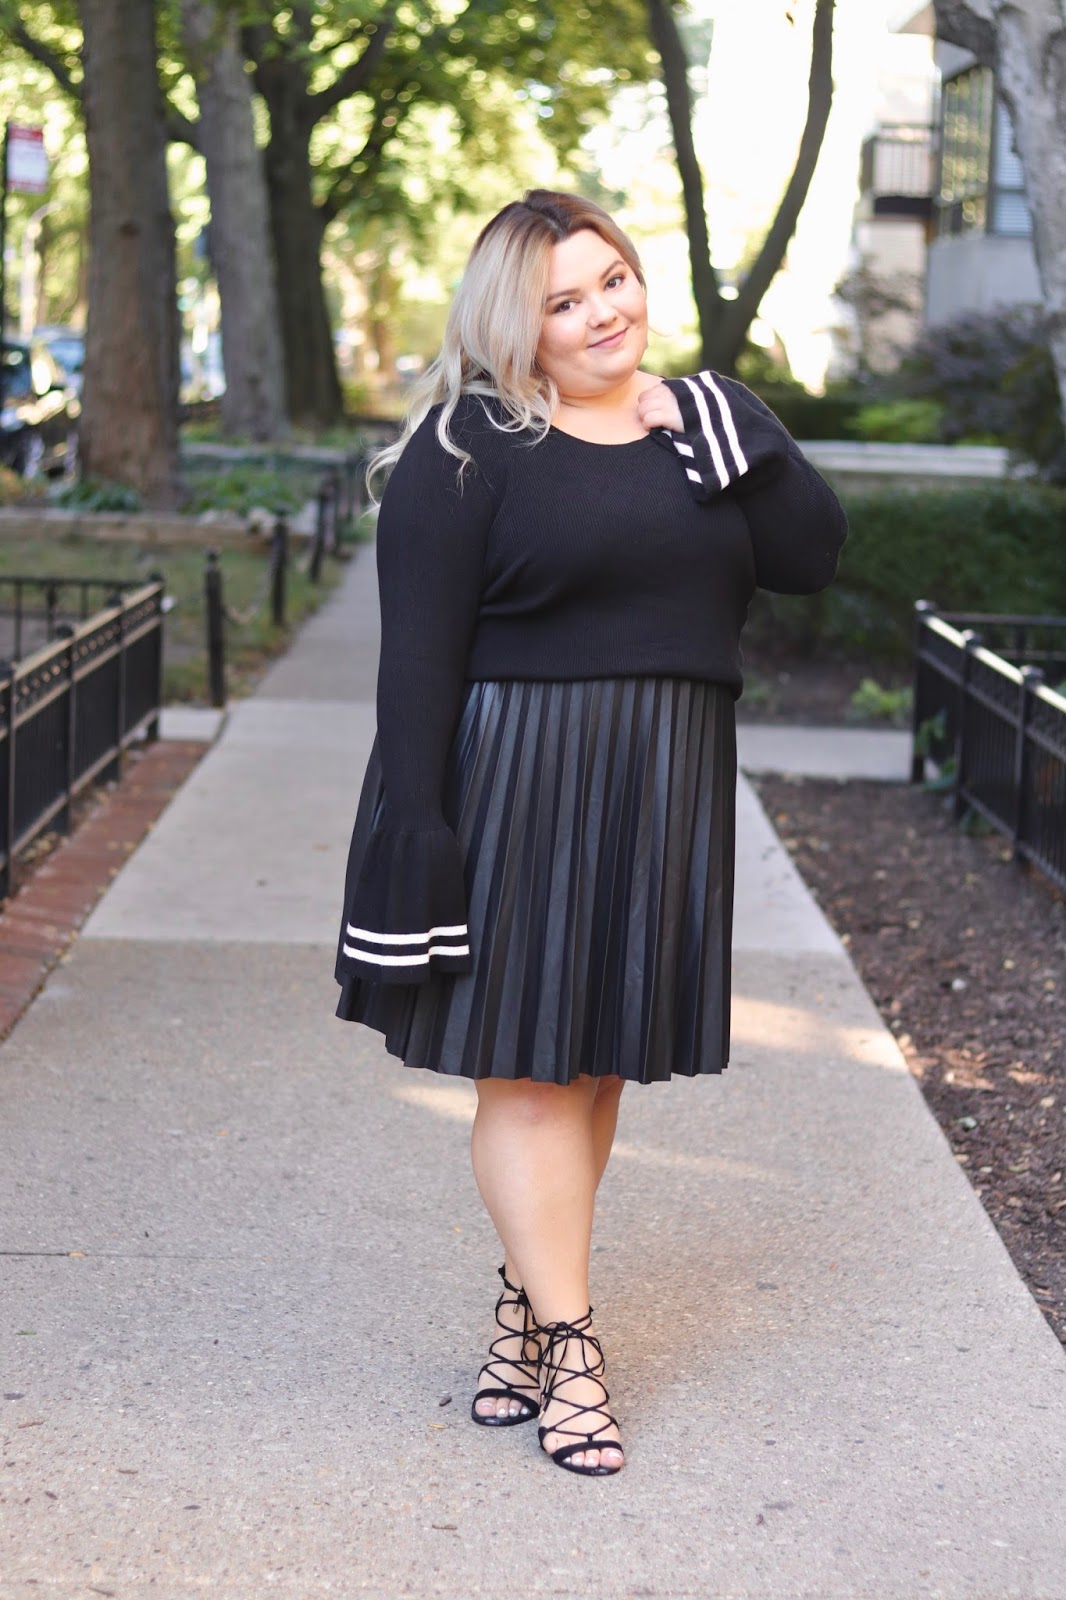 natalie craig, chicago fashion blogger, plus size fashion, Natalie in the city, affordable plus size clothing. eloquii Chicago, eloquii sweater, plus size clothes, curves and confidence, midwest blogger, digital influencer, influencer, pleated plus size maxi skirts, fall fashion 2017, plus size fall fashion